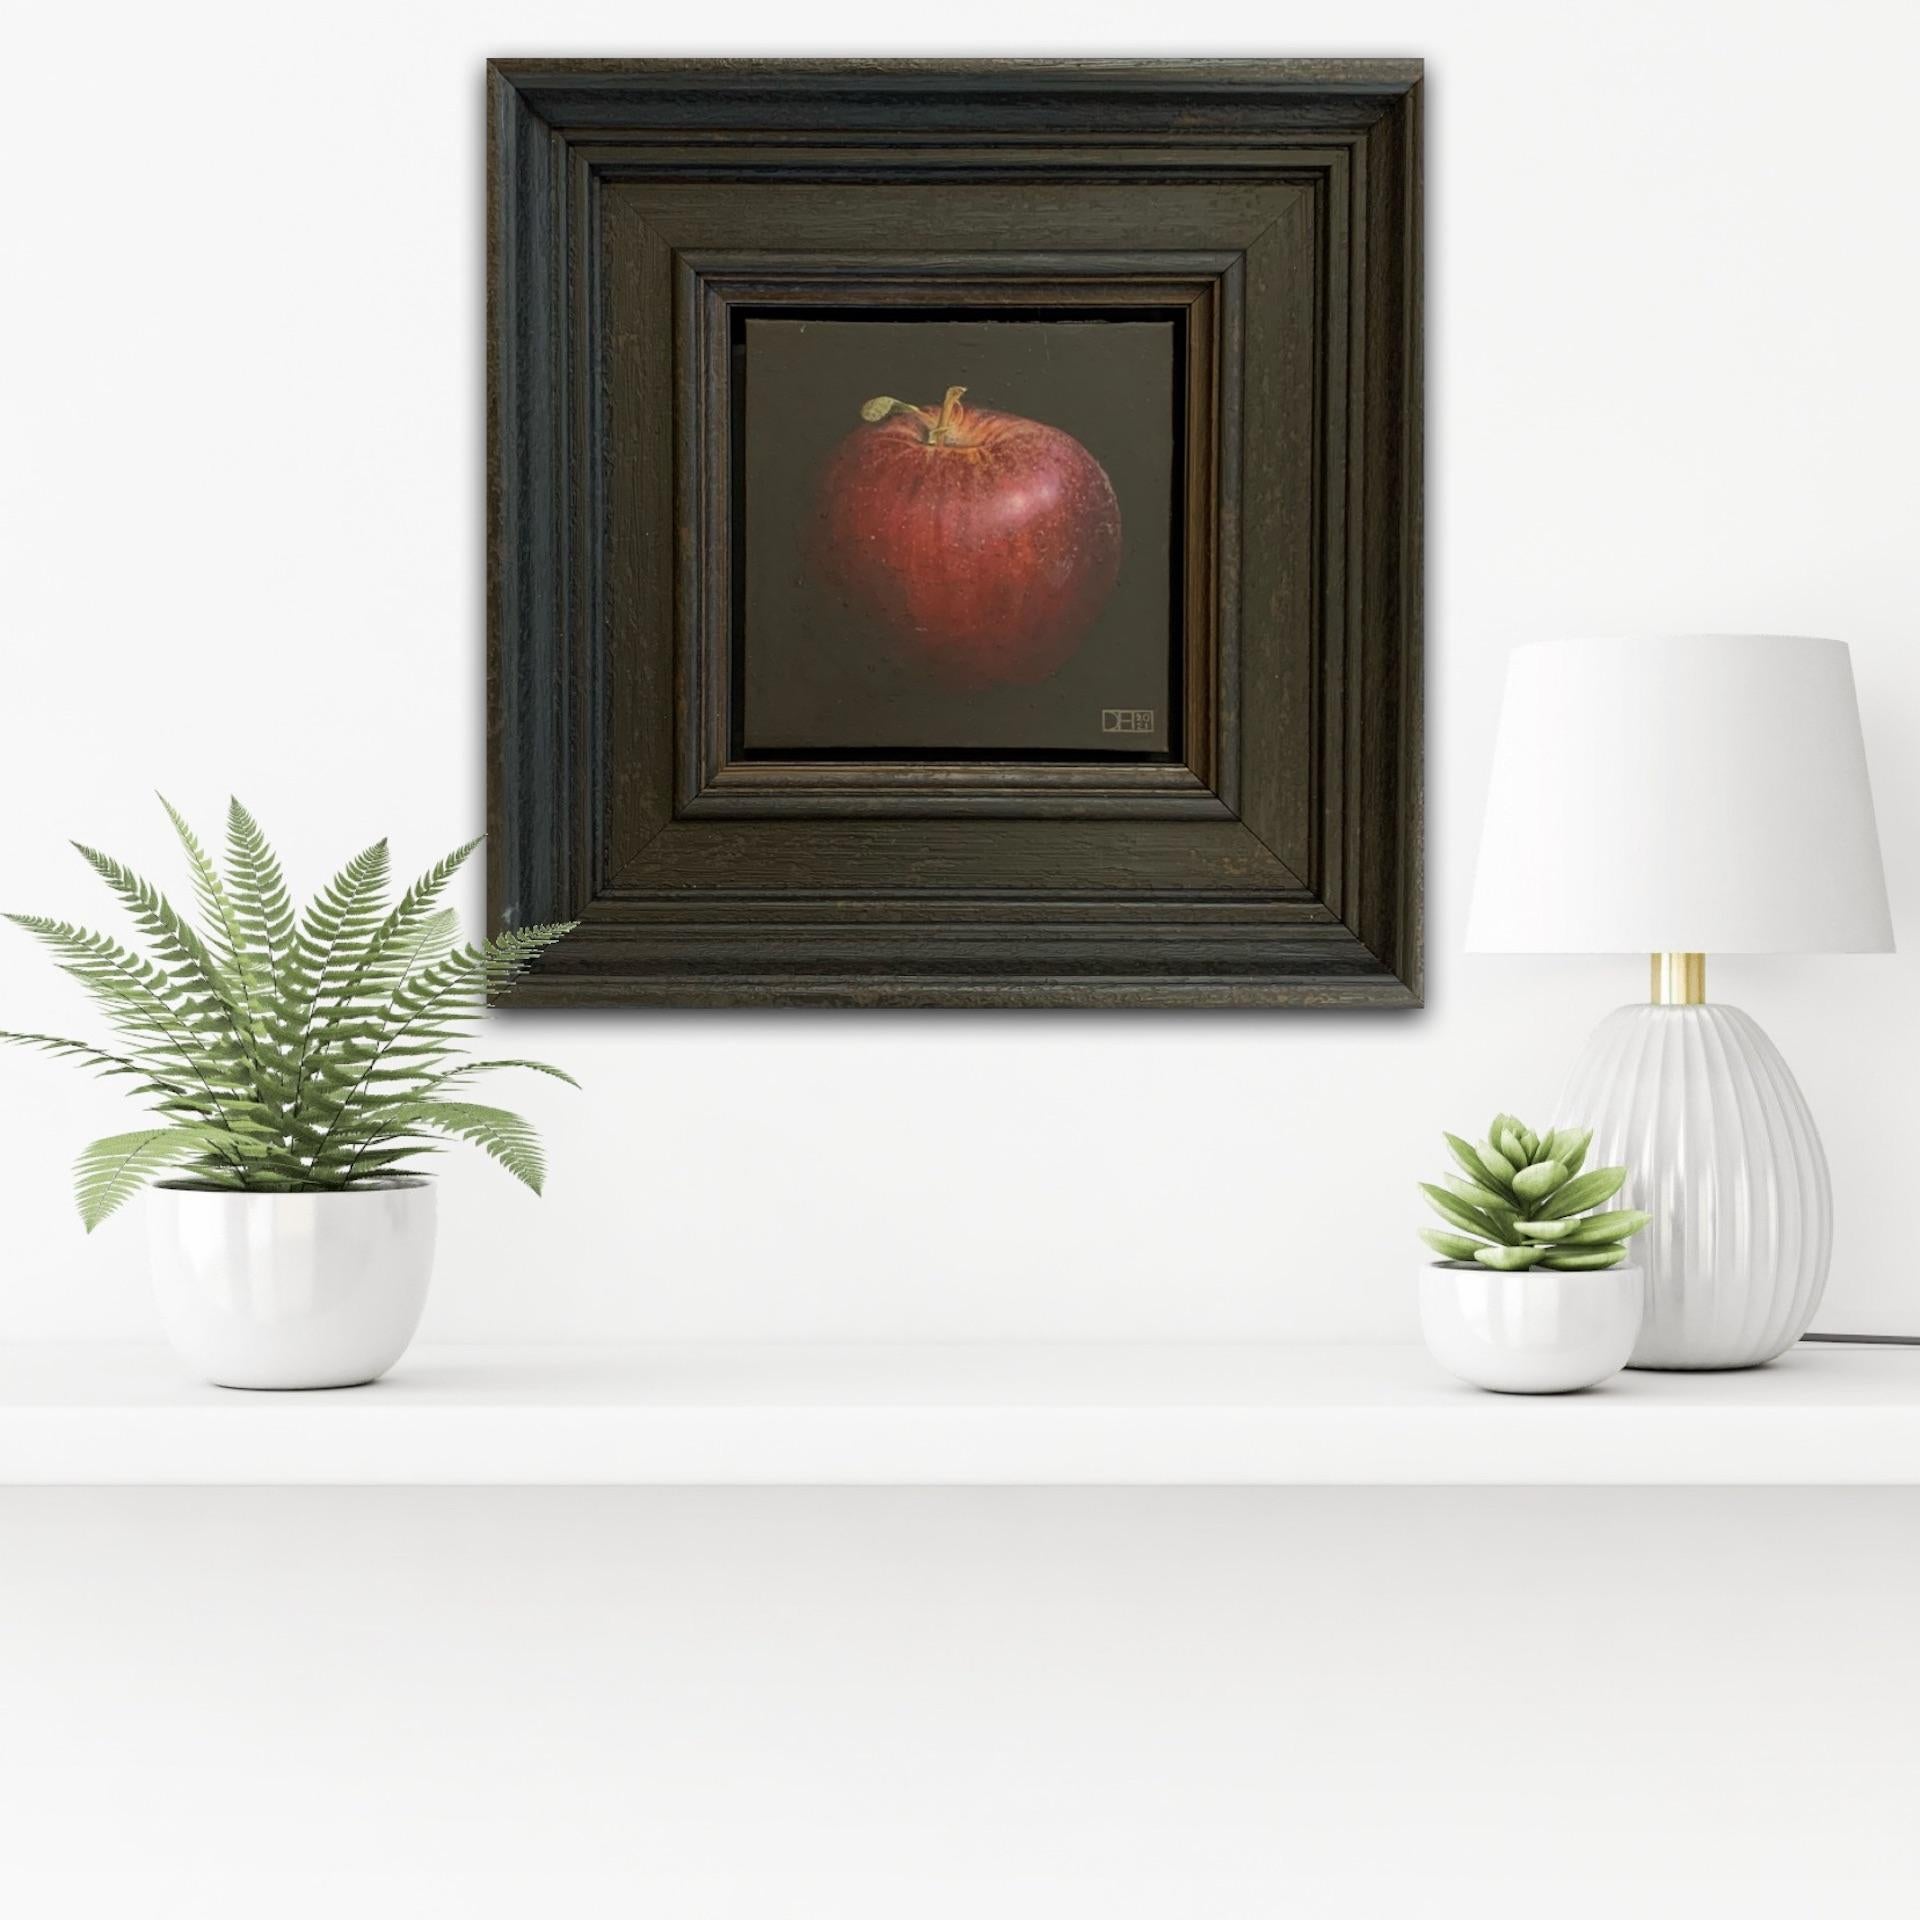 Deep Red Apple by Dani Humberstone [2021]
original

Oil paint on canvas

Image size: H:15 cm x W:15 cm

Complete Size of Unframed Work: H:15 cm x W:15 cm x D:4cm

Framed Size: H:31 cm x W:31 cm x D:5cm

Sold Framed

Please note that insitu images